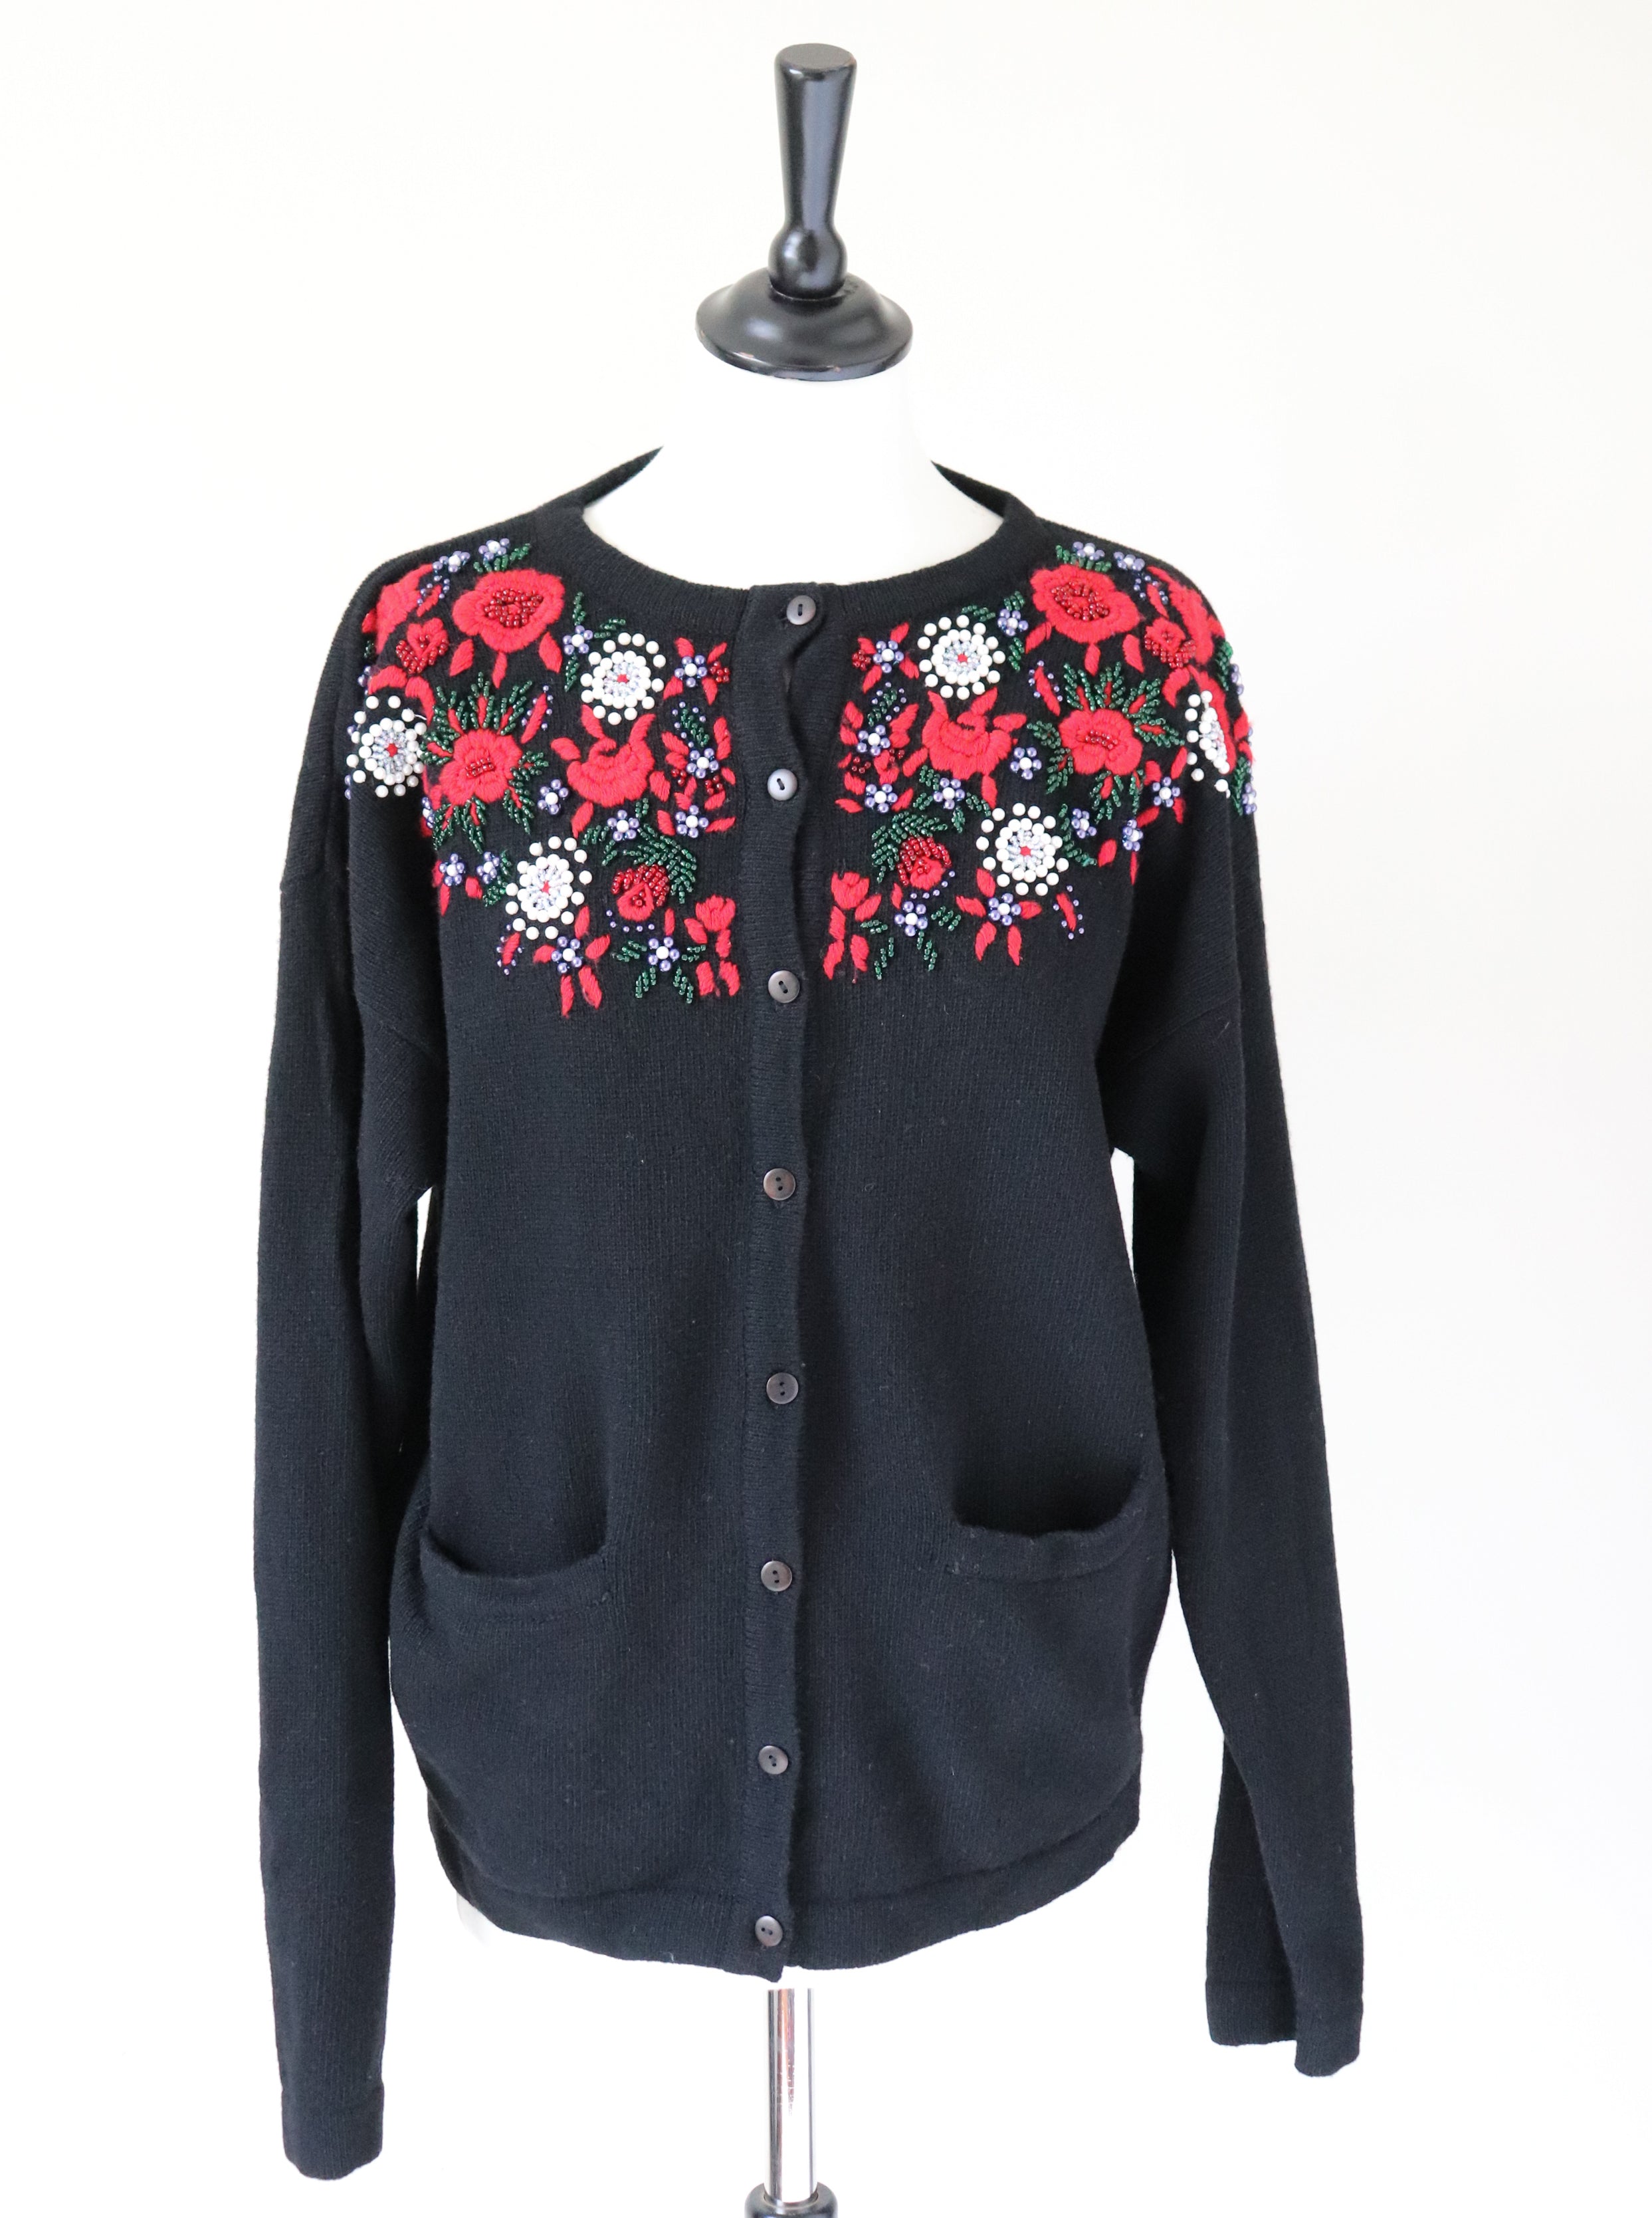 Vintage Beaded Embroidered Cardigan - Lambswool -  Black / Red - M / UK 12